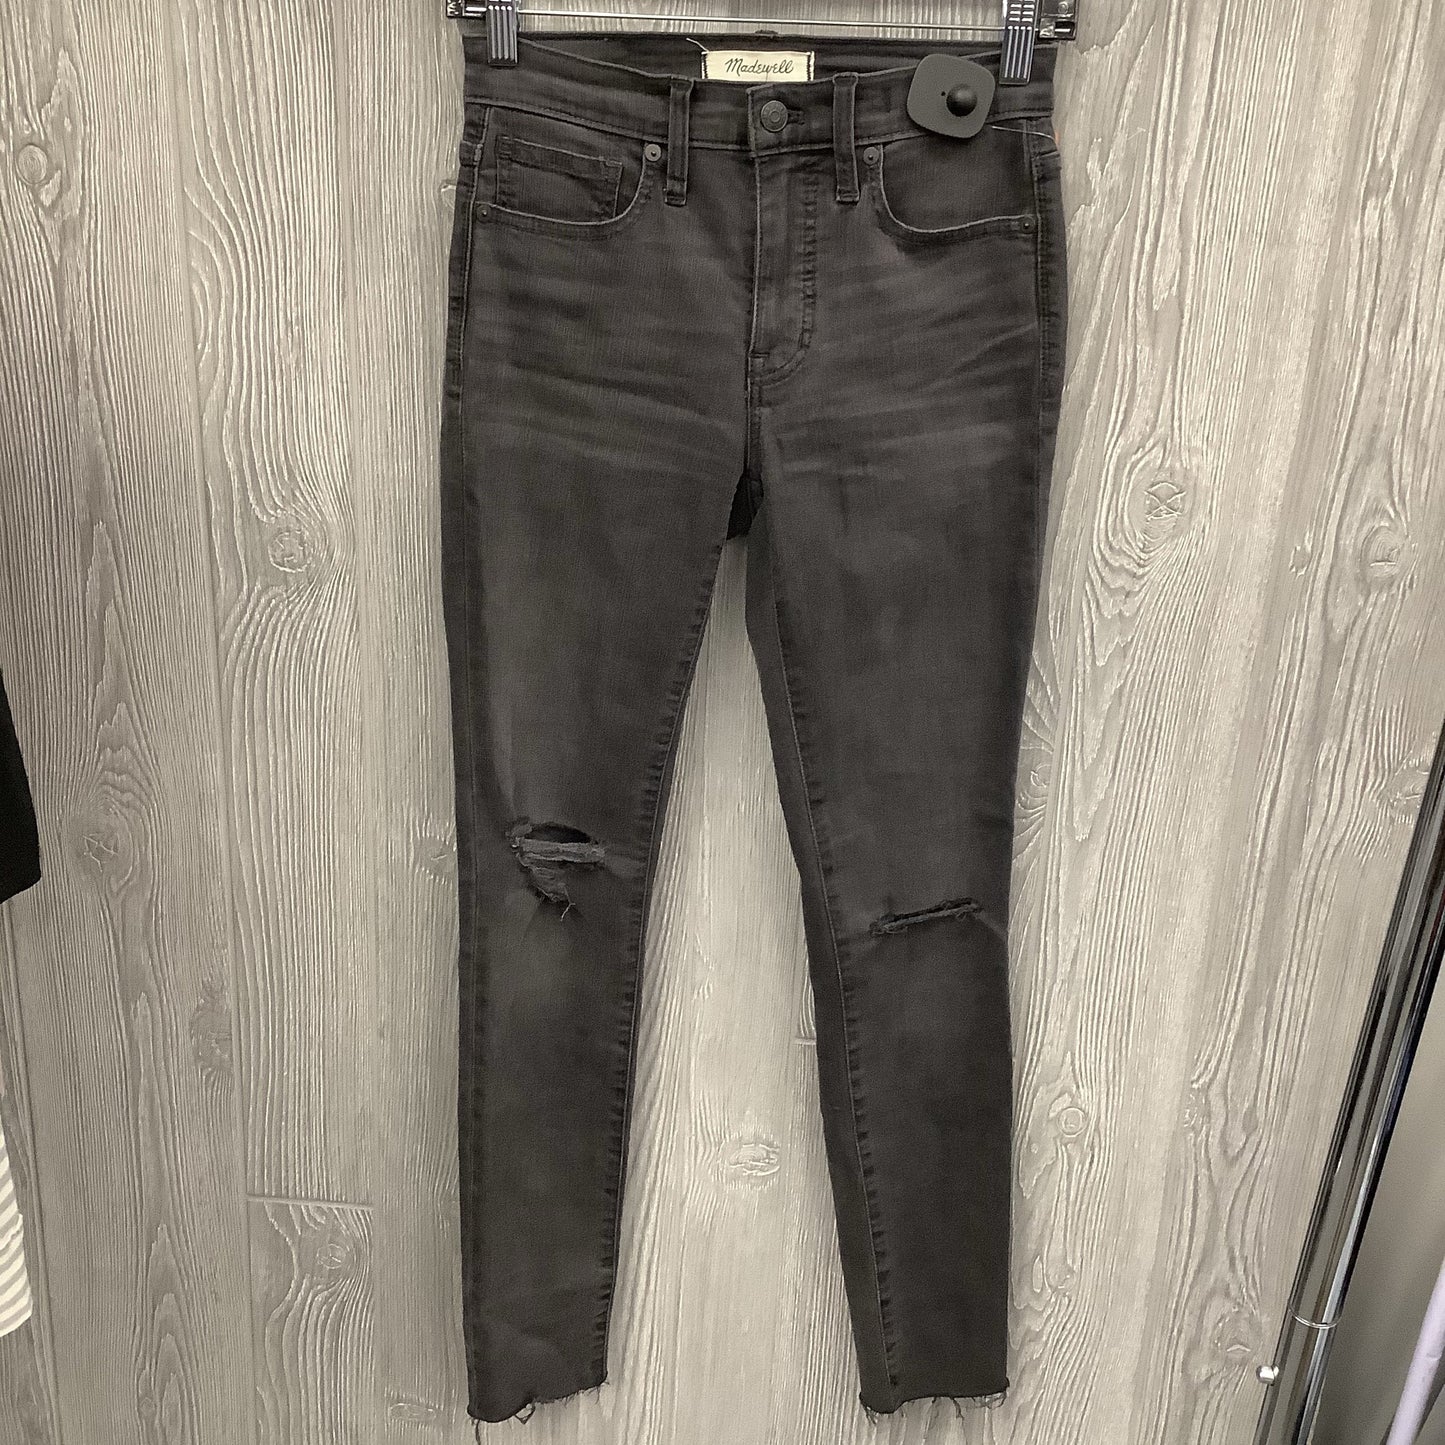 JEANS SIZE 2 BY MADEWELL